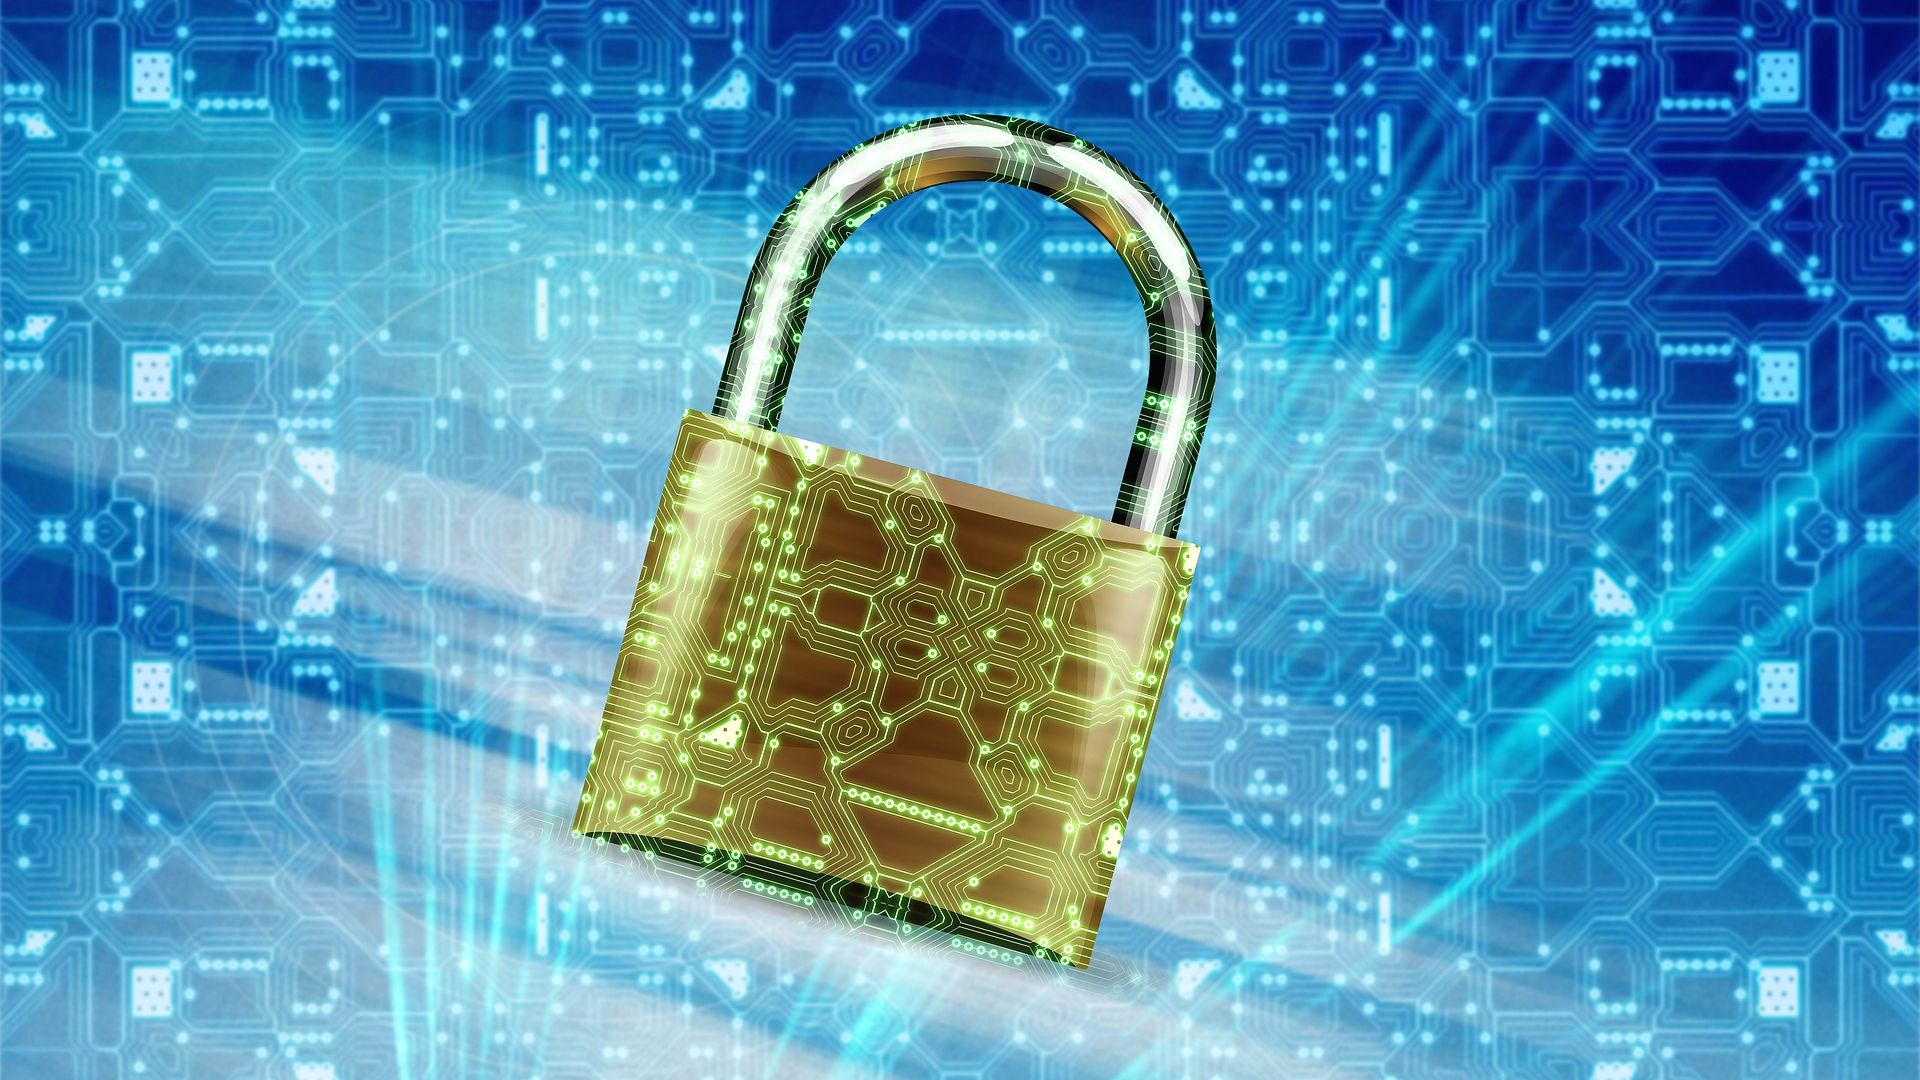 Graphic of a circuit pattern padlock on a blue background